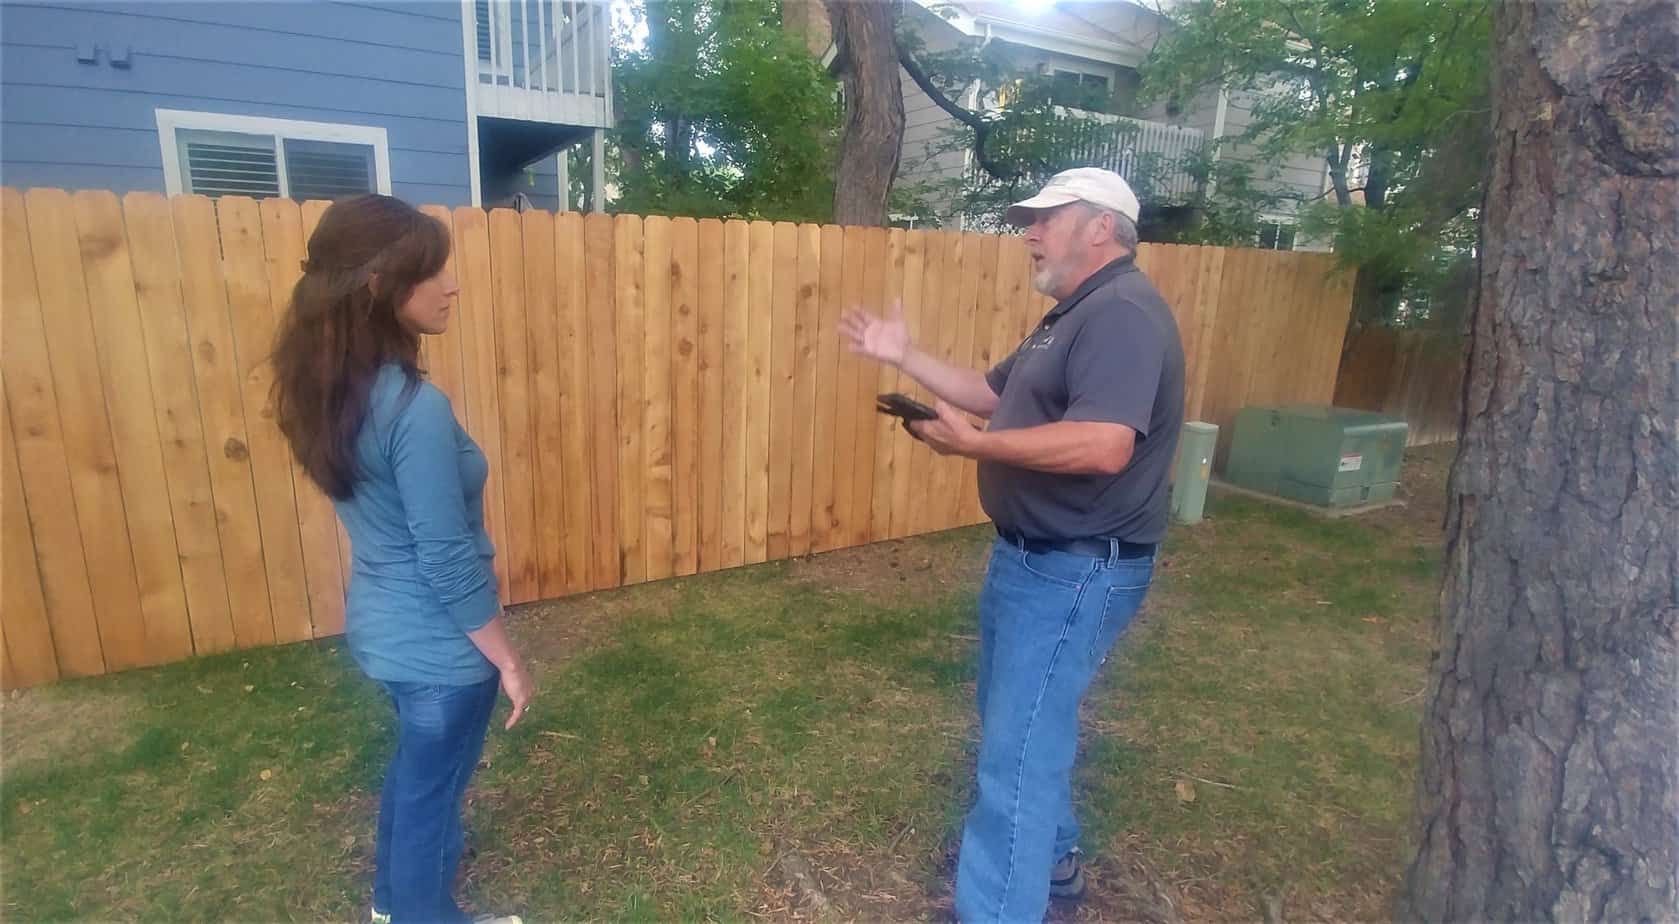 Wildfire Partners Mitigation Specialist speaks with a homeowner participating in the Plains Pilot Project